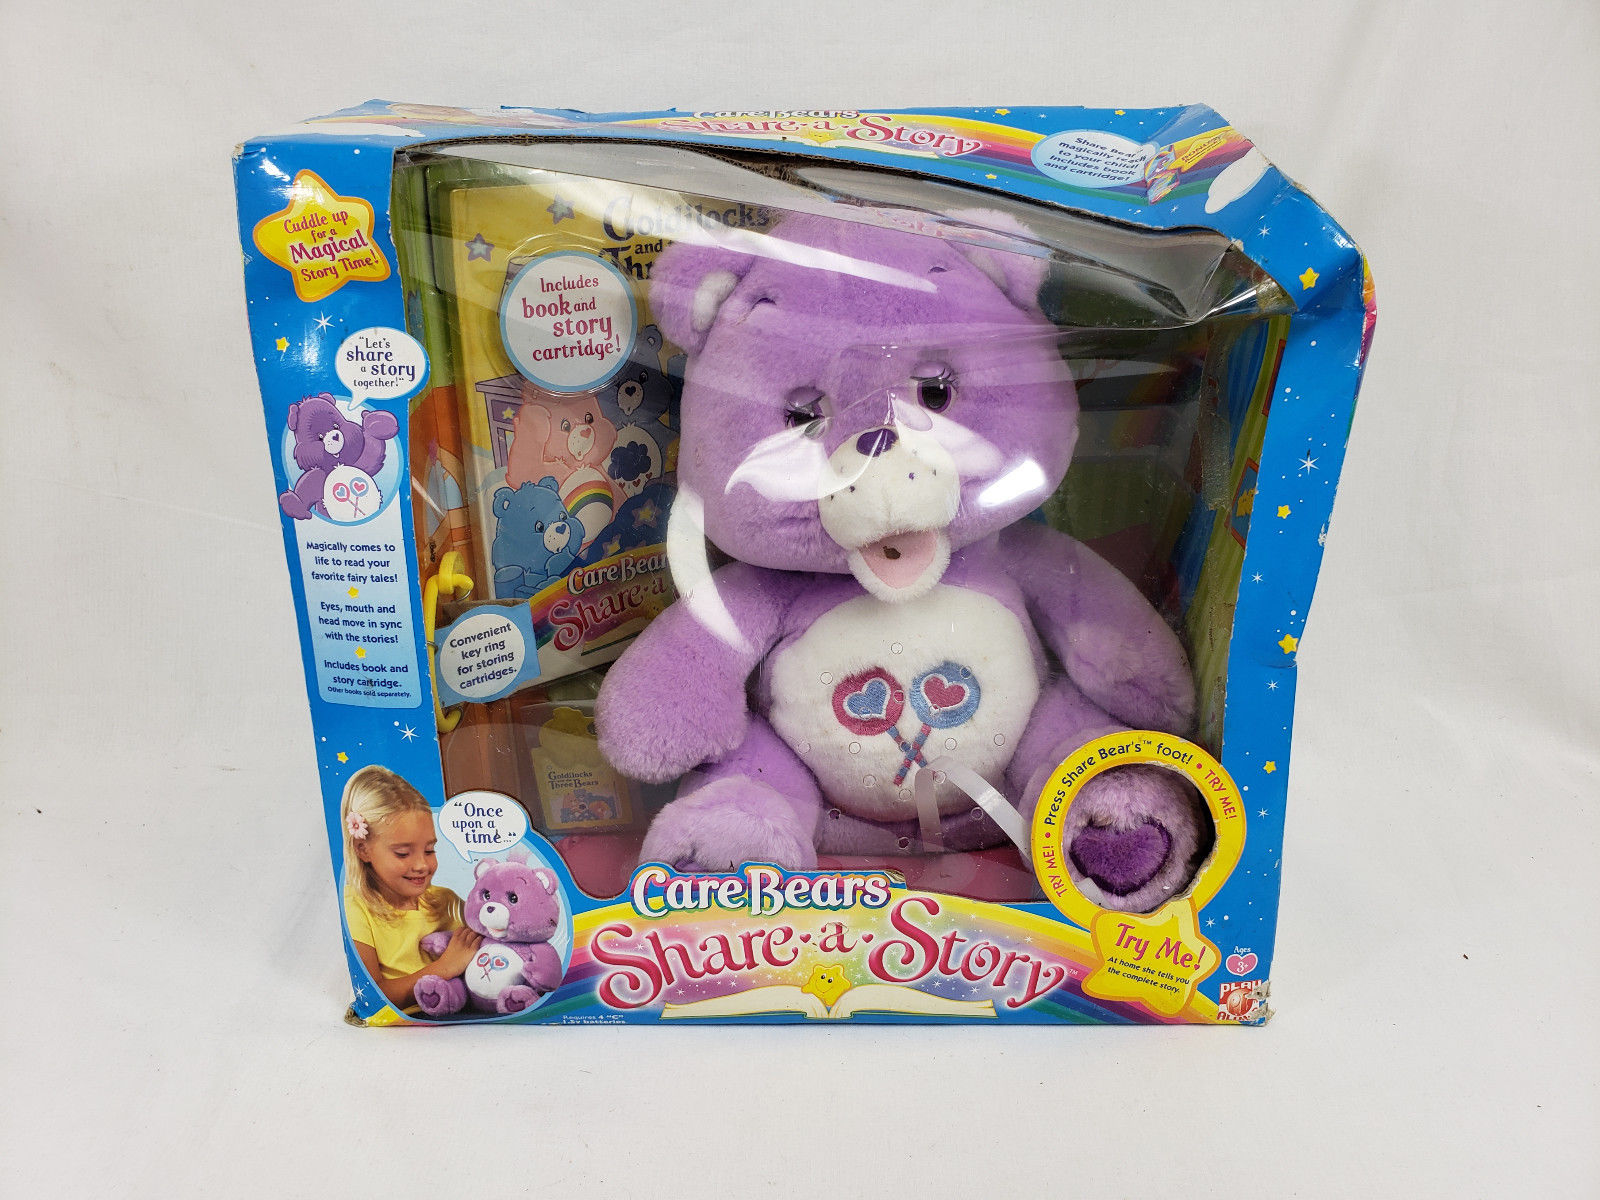 New Care Bears Share a Story Talking Bear New In Box 2005 - Never Opened